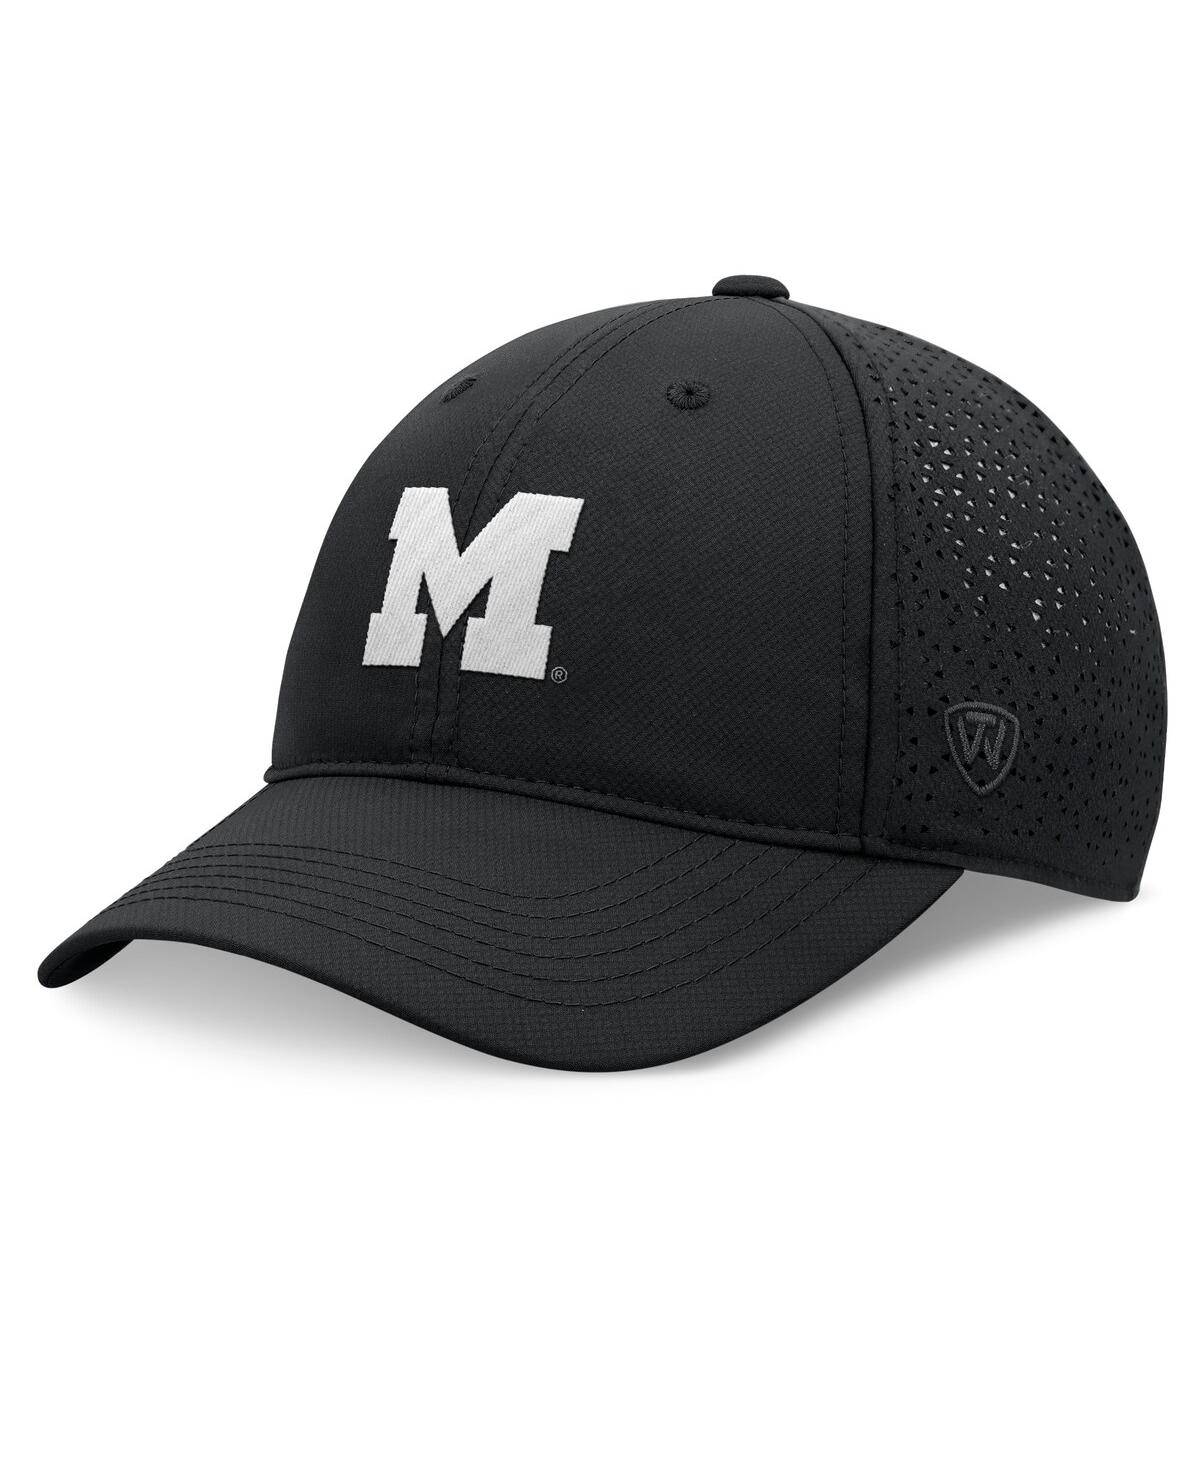 TOP OF THE WORLD MEN'S TOP OF THE WORLD BLACK MICHIGAN WOLVERINES LIQUESCE TRUCKER ADJUSTABLE HAT